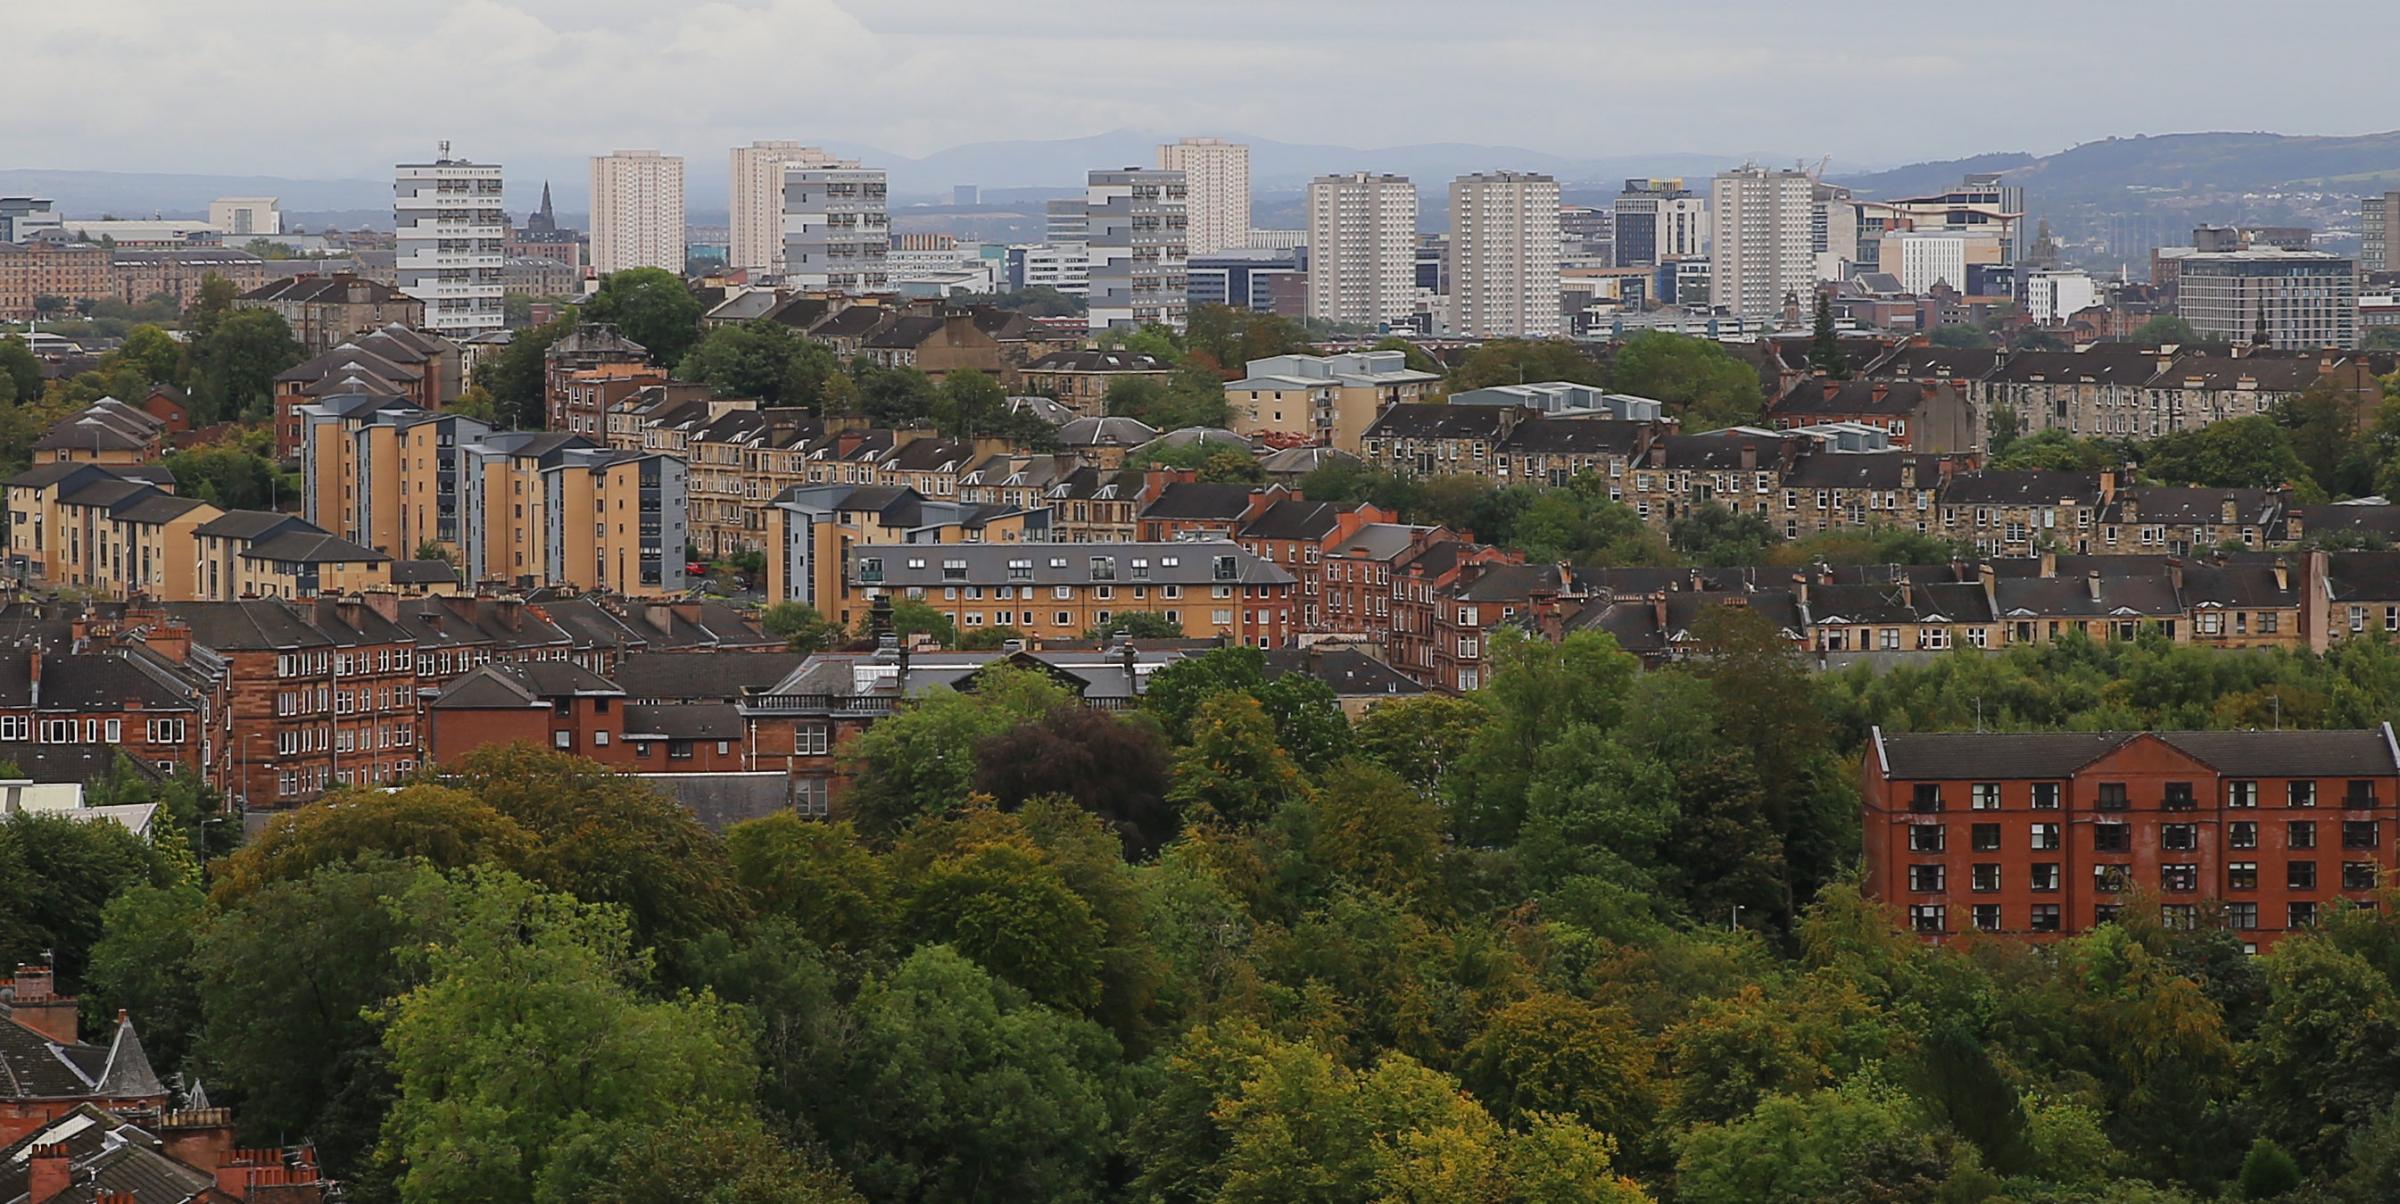 A view of Glasgow from the 21st floor of the tower block at 151 Wyndford Road, Maryhill. Photograph by Colin Mearns.